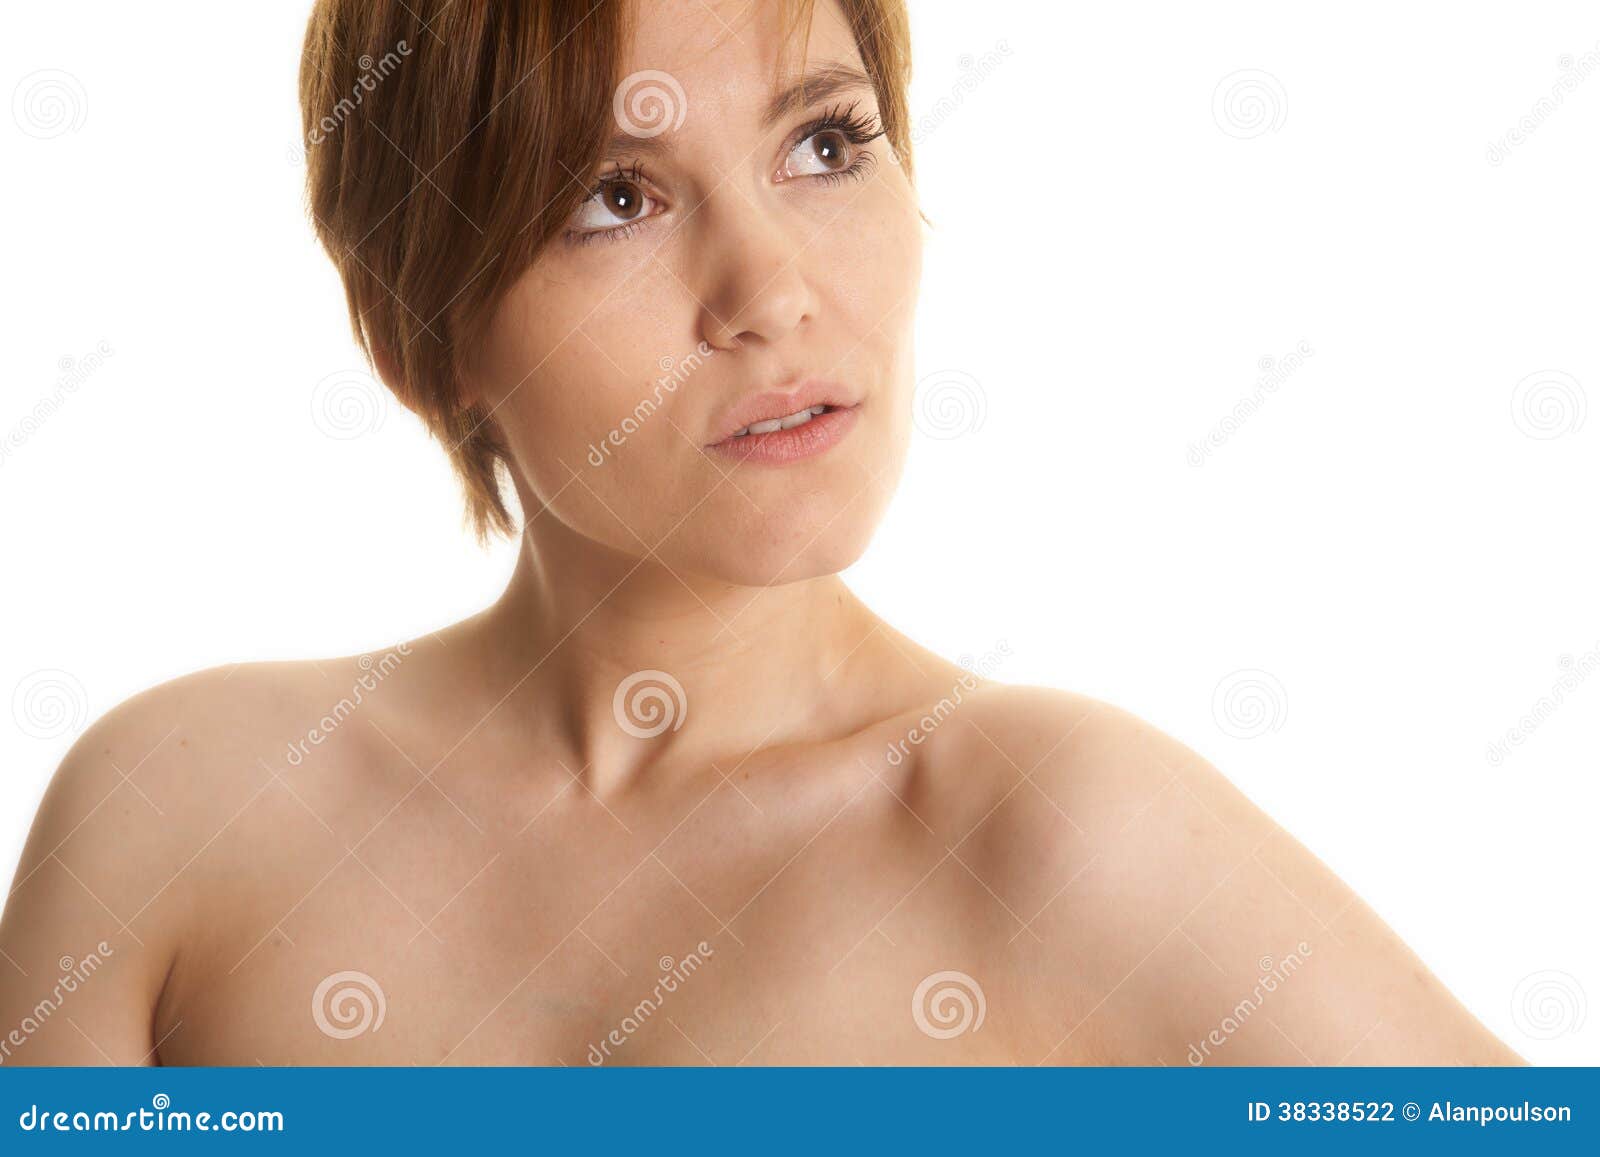 https://thumbs.dreamstime.com/z/latin-woman-head-close-look-side-serious-bare-skin-looking-up-38338522.jpg